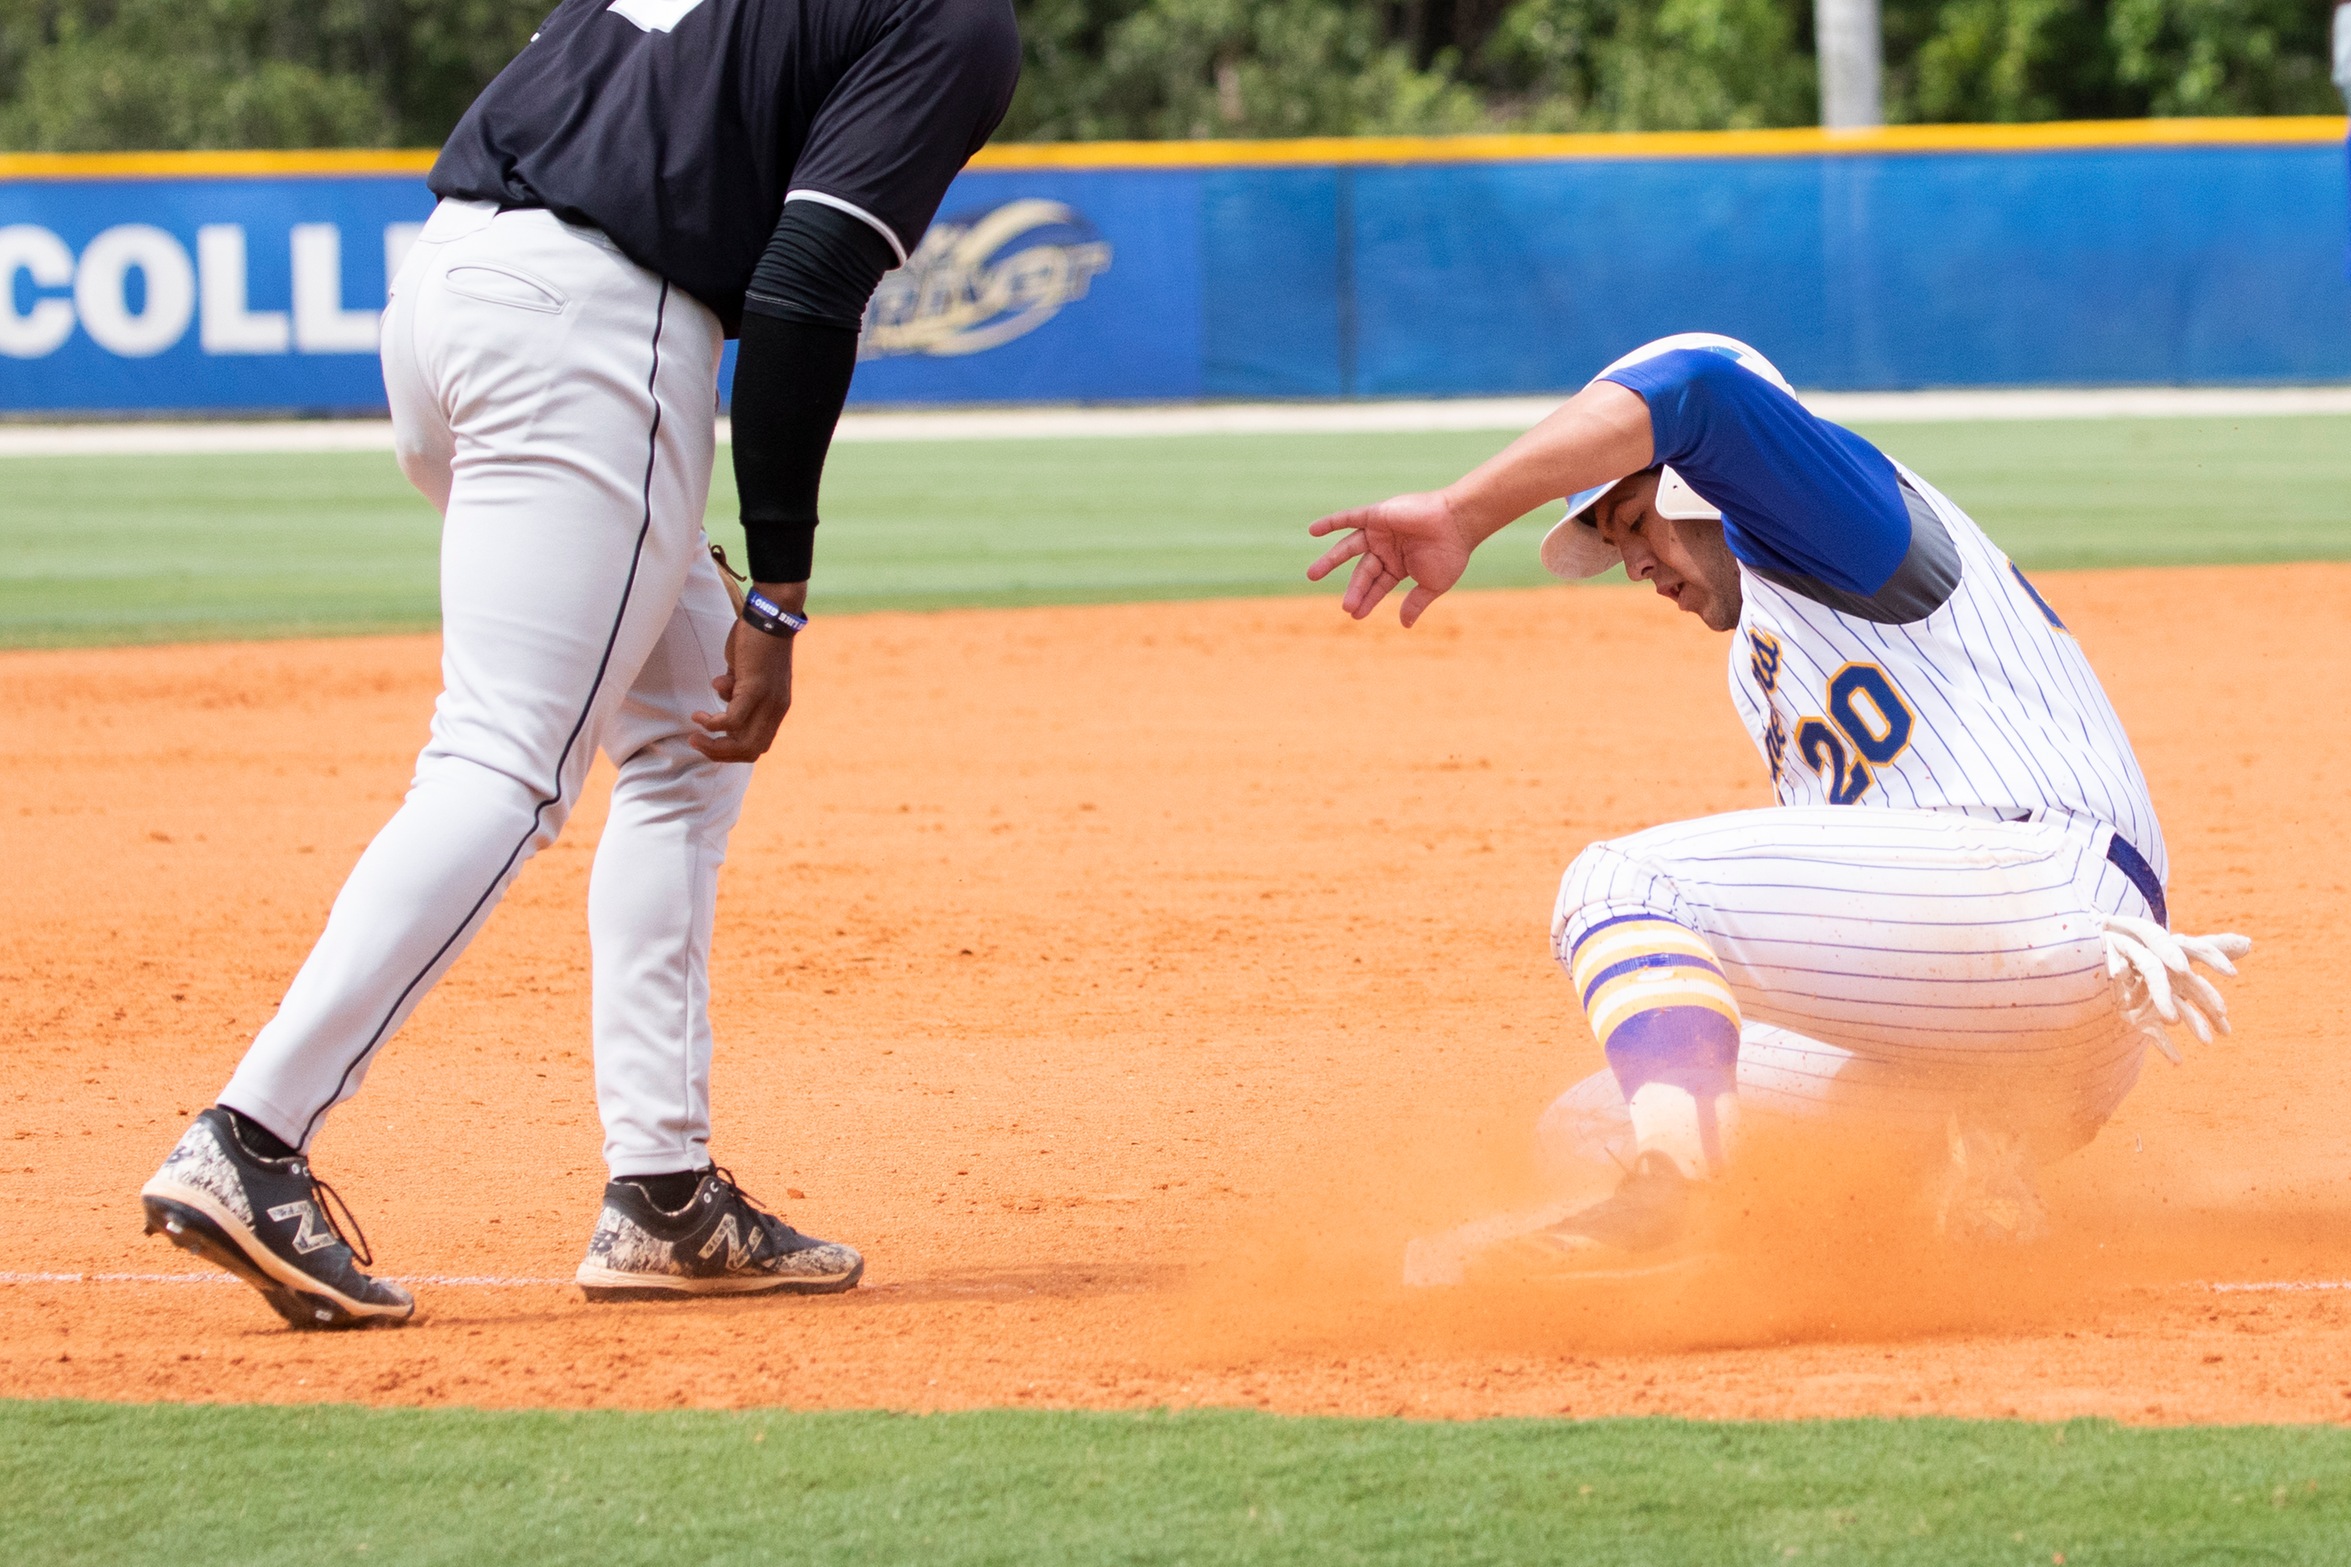 Indian River State Pioneers Falls to South Florida State College Panthers Varsity After Ninth Inning Score